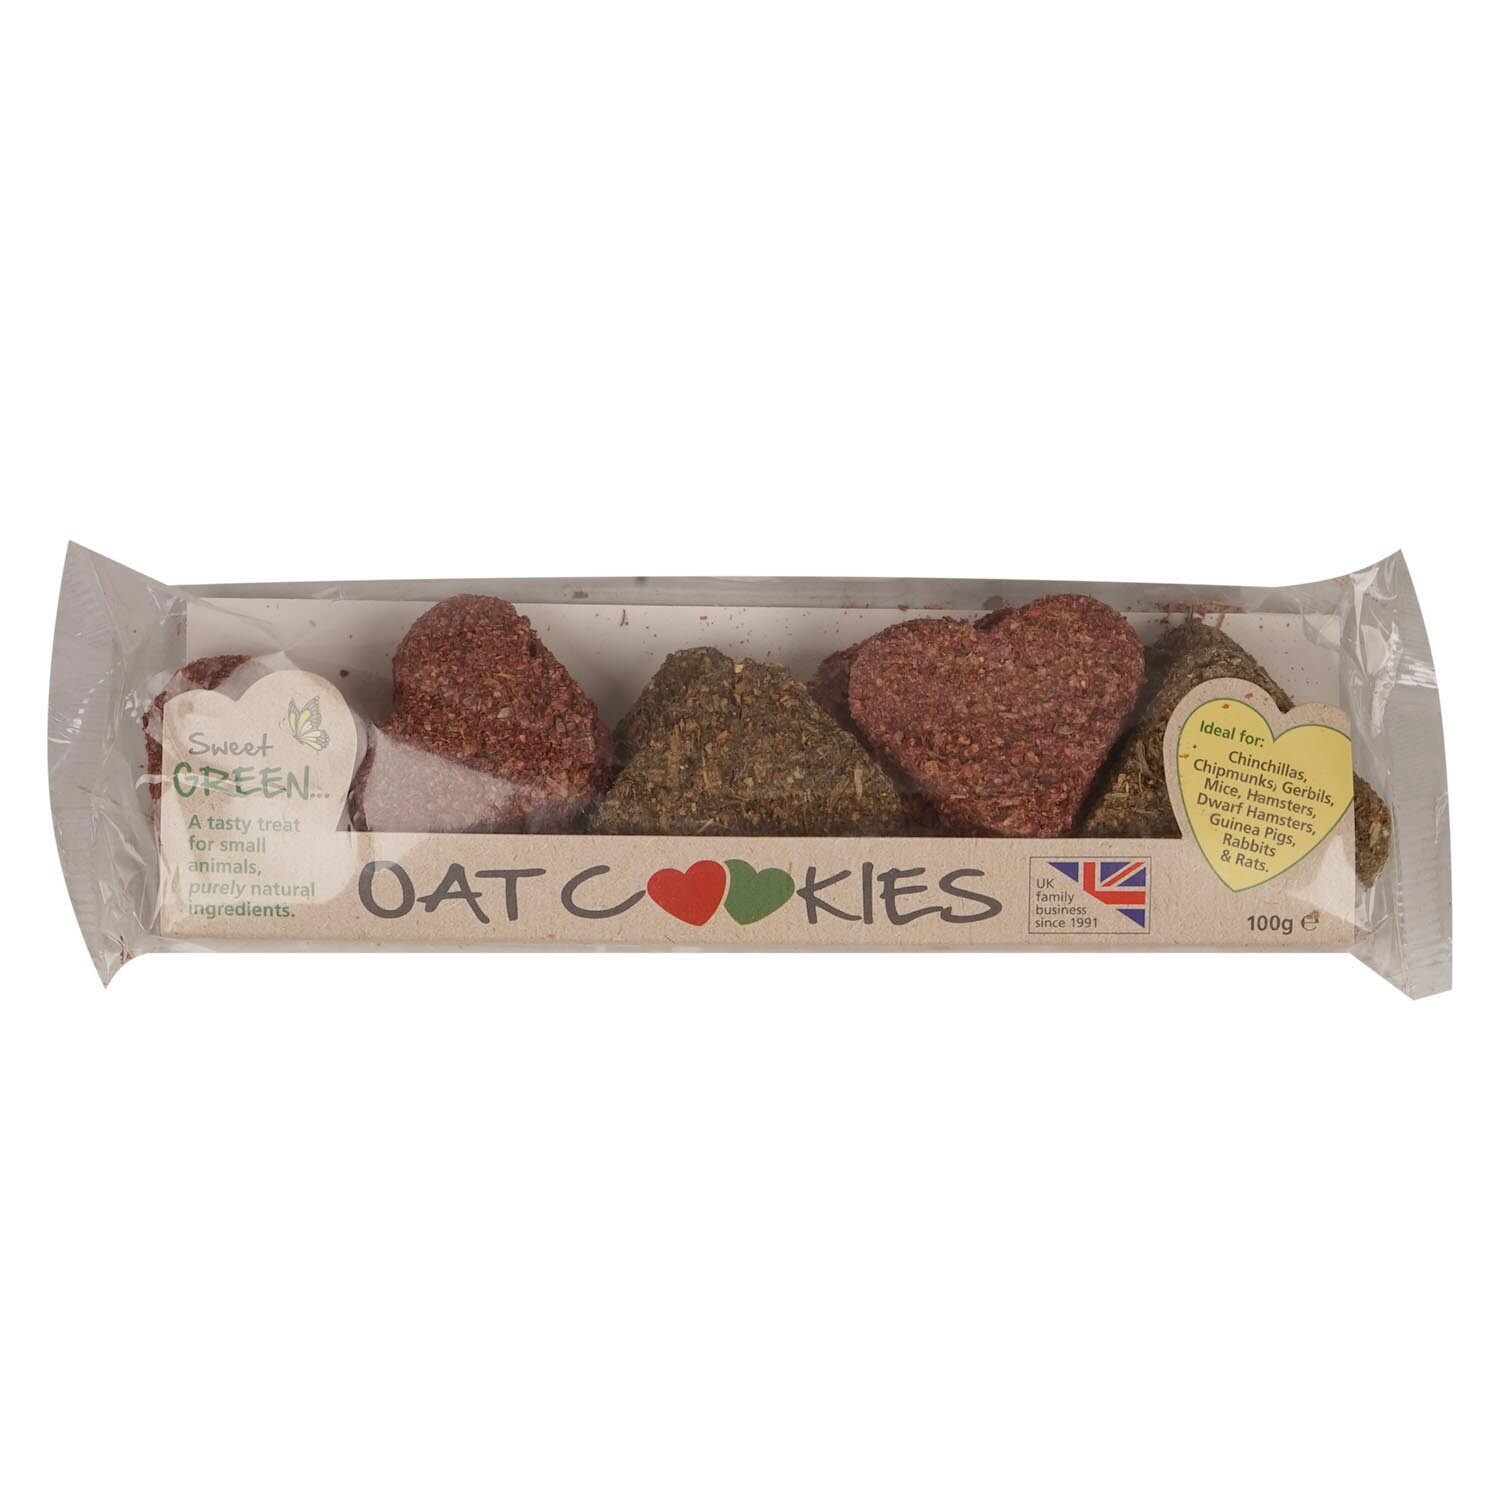 Sweet Green Small Animal Oat Cookies Treat 100g Image